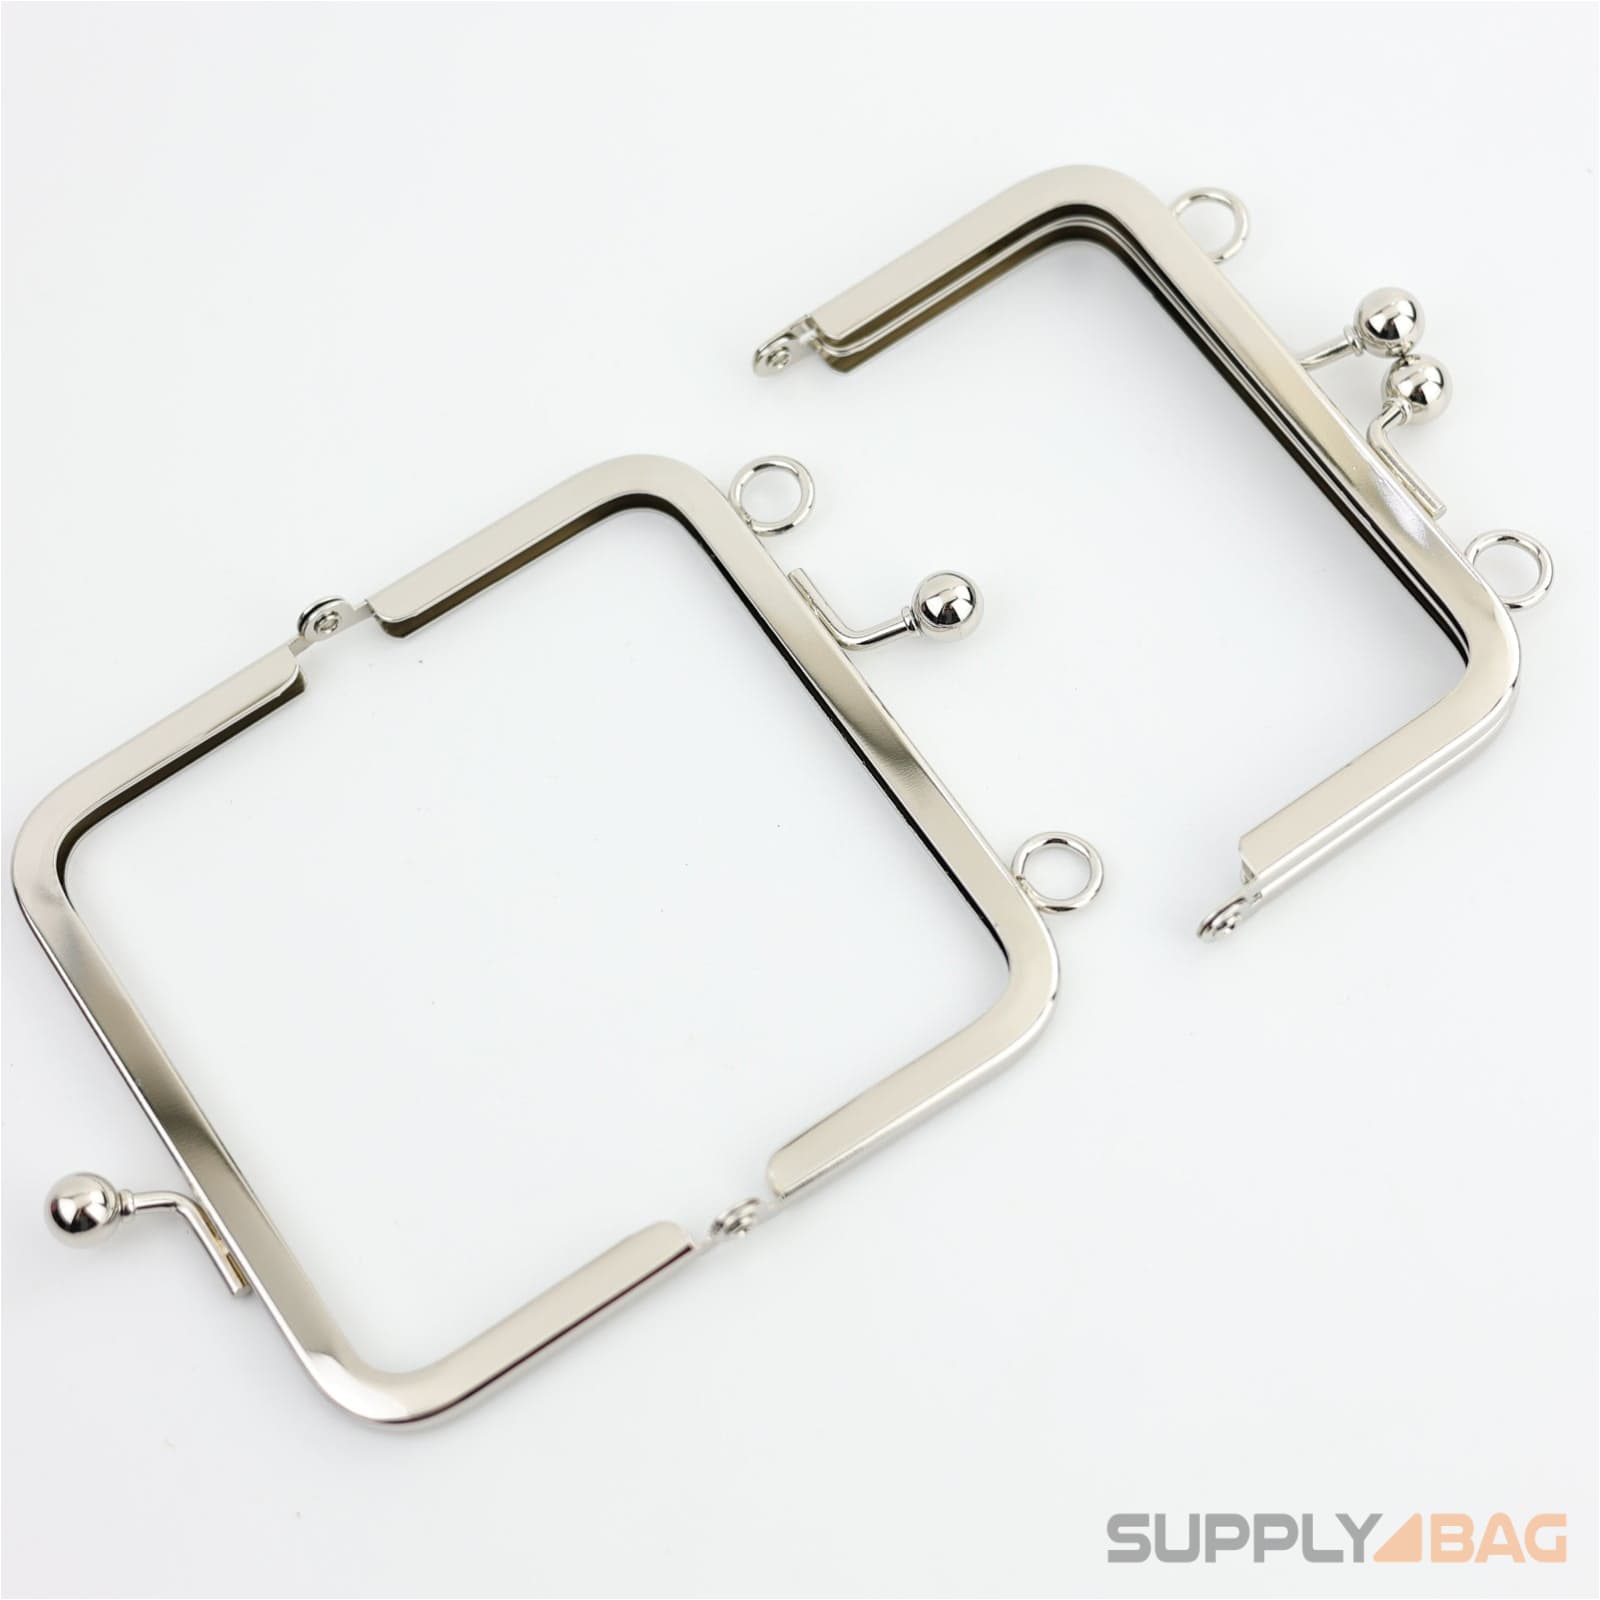 4 x 2 1/4 inch - Silver Metal Coin Purse Frame with O Rings